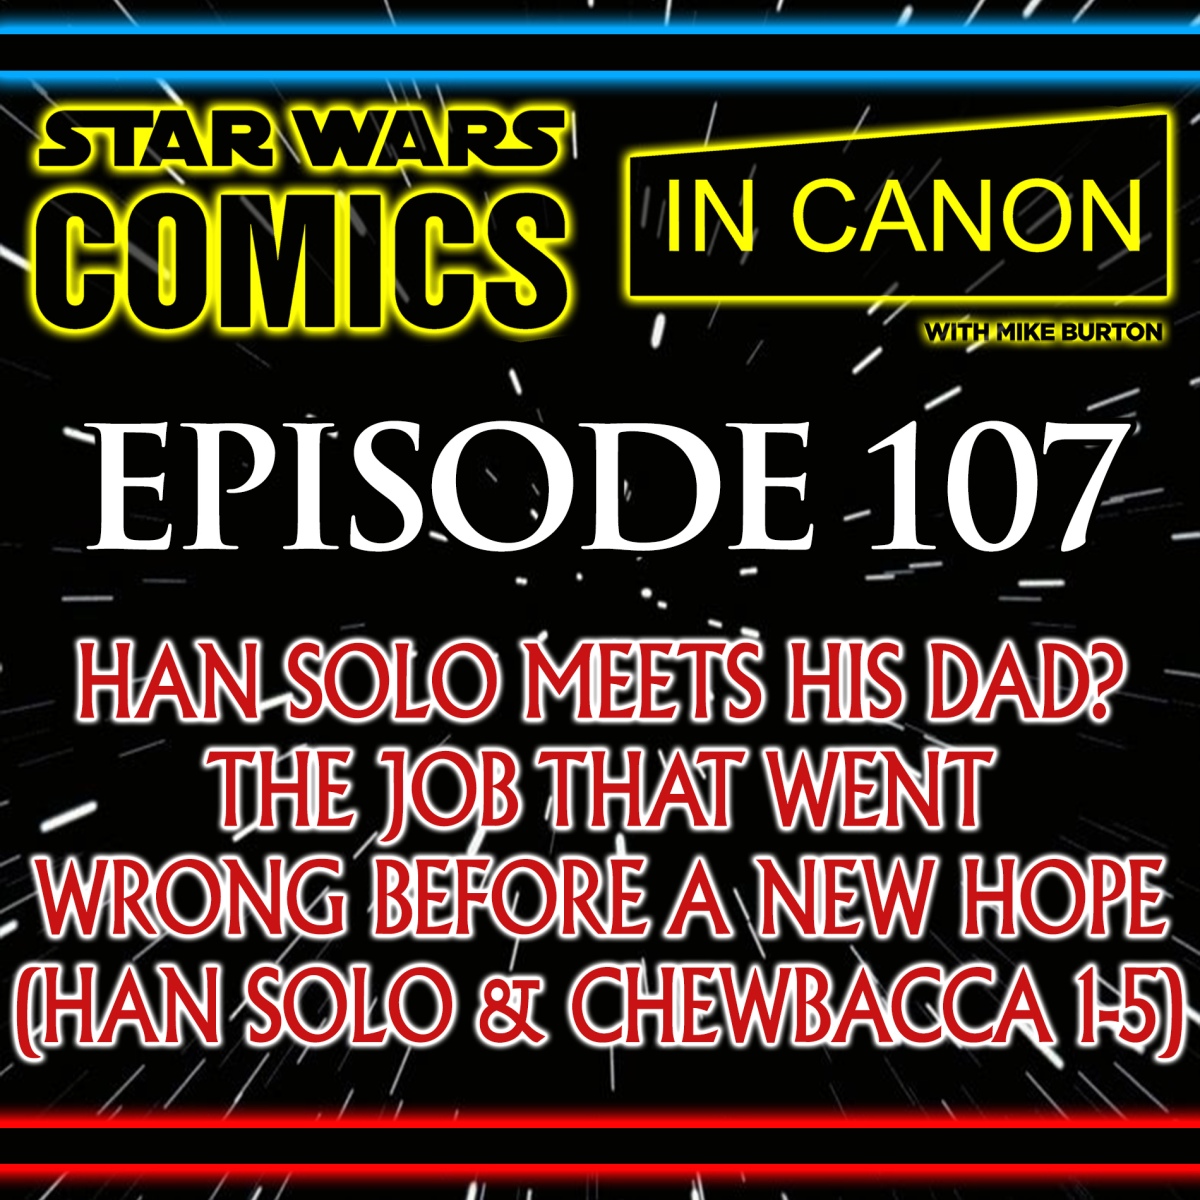 Star Wars: Comics In Canon – Han Solo & Chewbacca Vol 1: Han Solo Meets His Dad? The Job That Went Wrong Before A New Hope, Plus Greedo, Krrsantan, Jabba The Hutt & More (Han & Chewie #1-5) – Ep 107